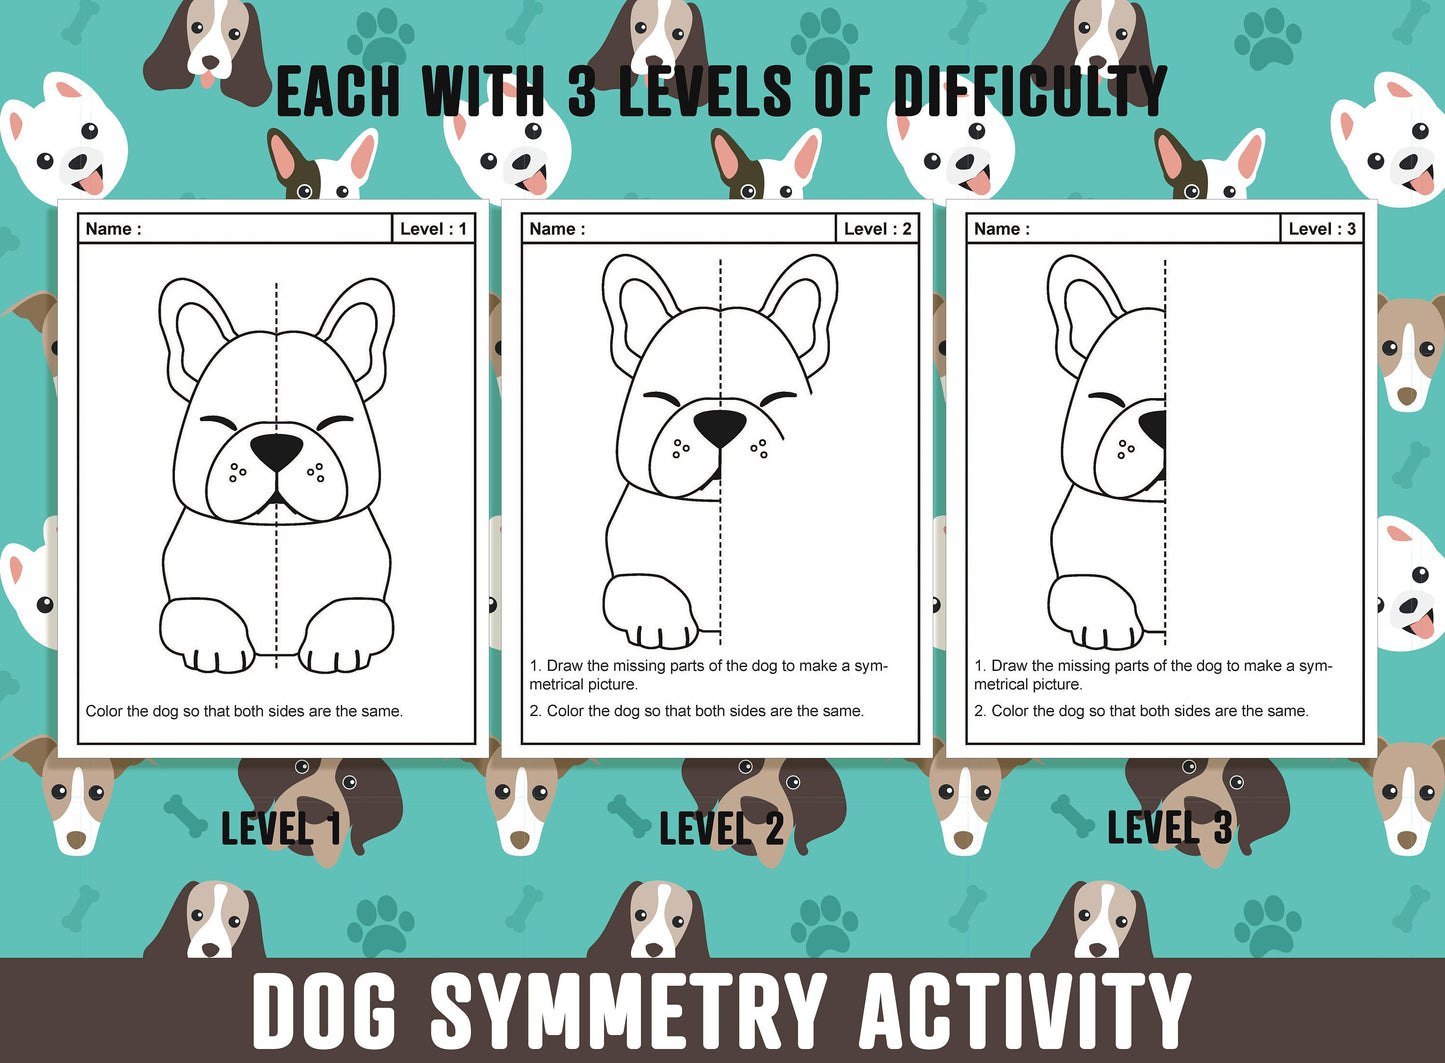 Dog Symmetry Worksheet, Puppy Theme Lines of Symmetry Activity, 24 Pages, Includes 8 Designs, Each With 3 Levels of Difficulty, Art & Math